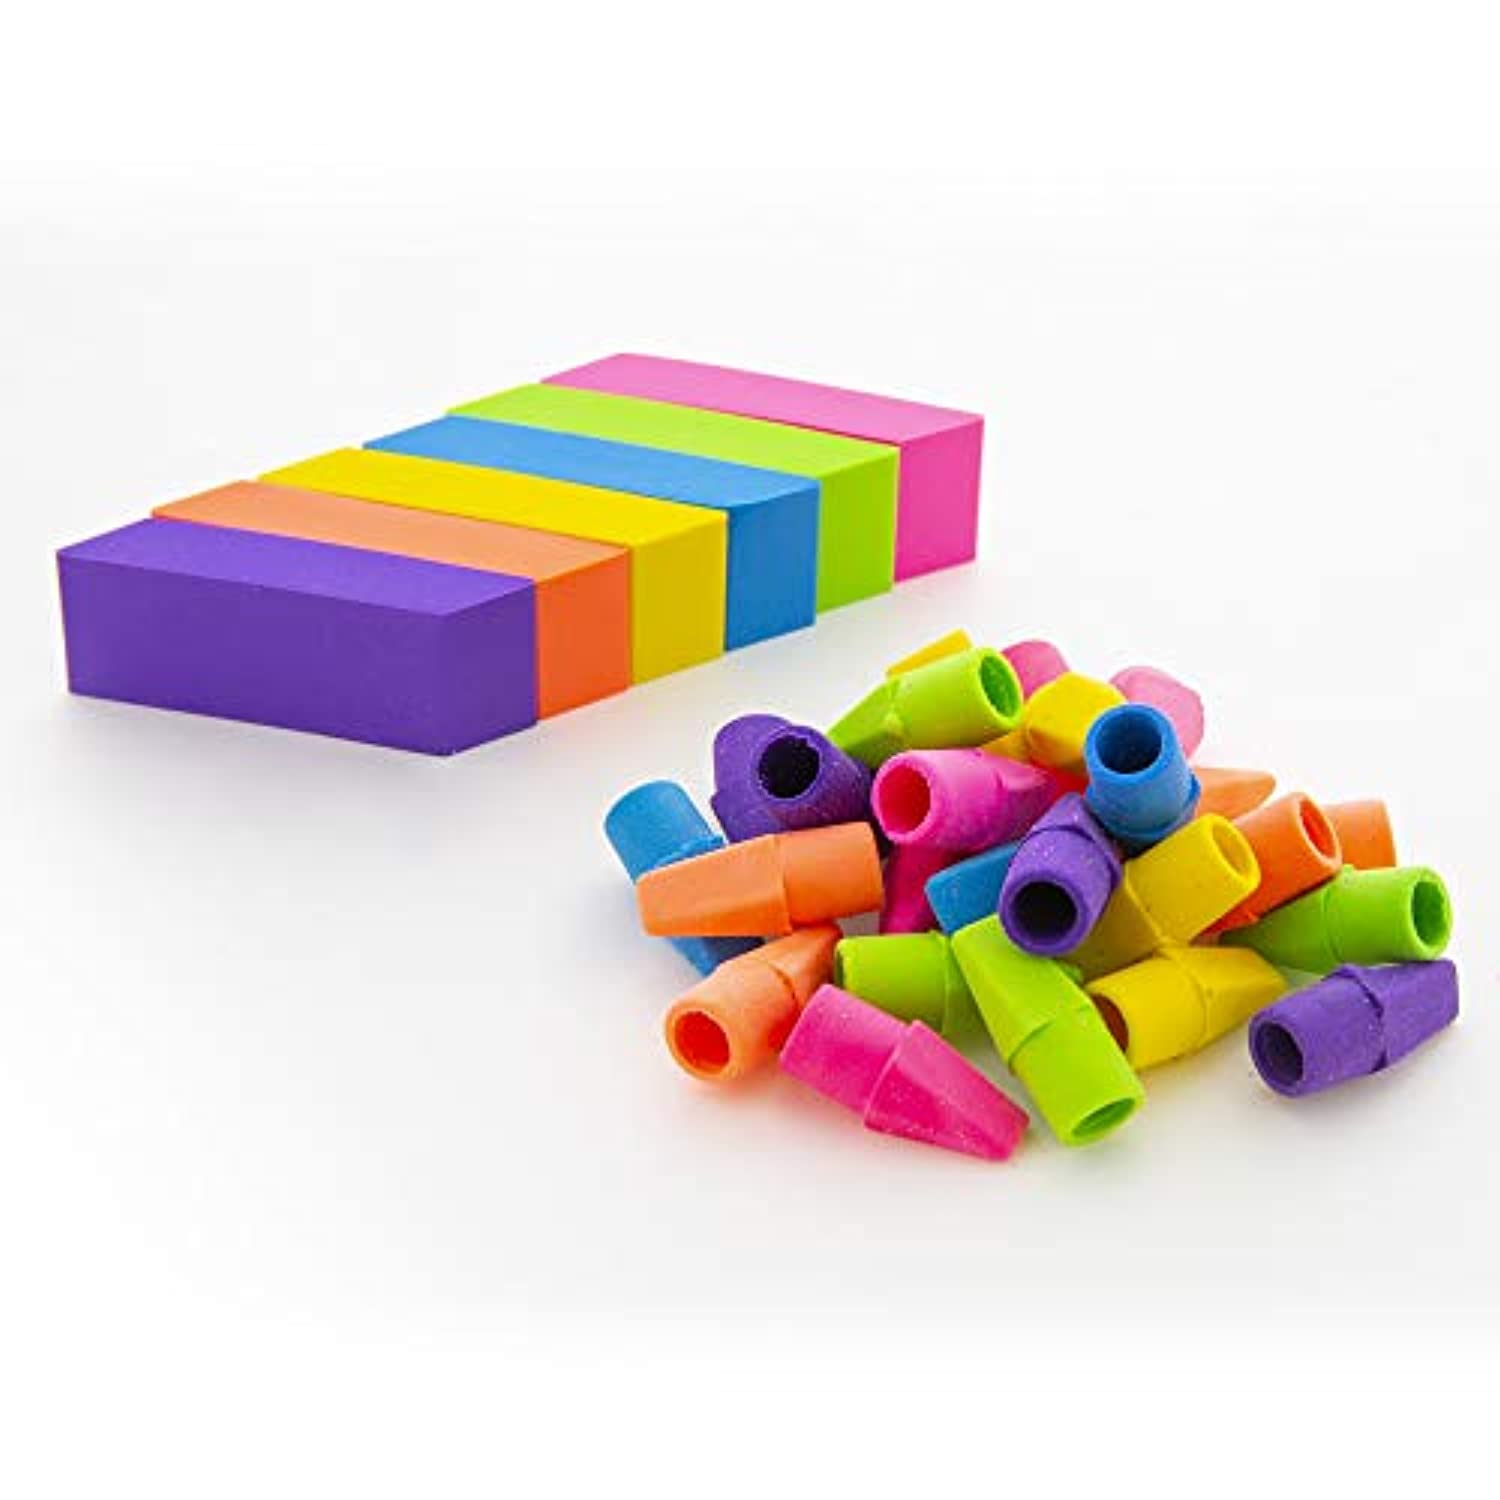 Neon Eraser Top, Latex Free Pencil Top Erasers (20/Pack)